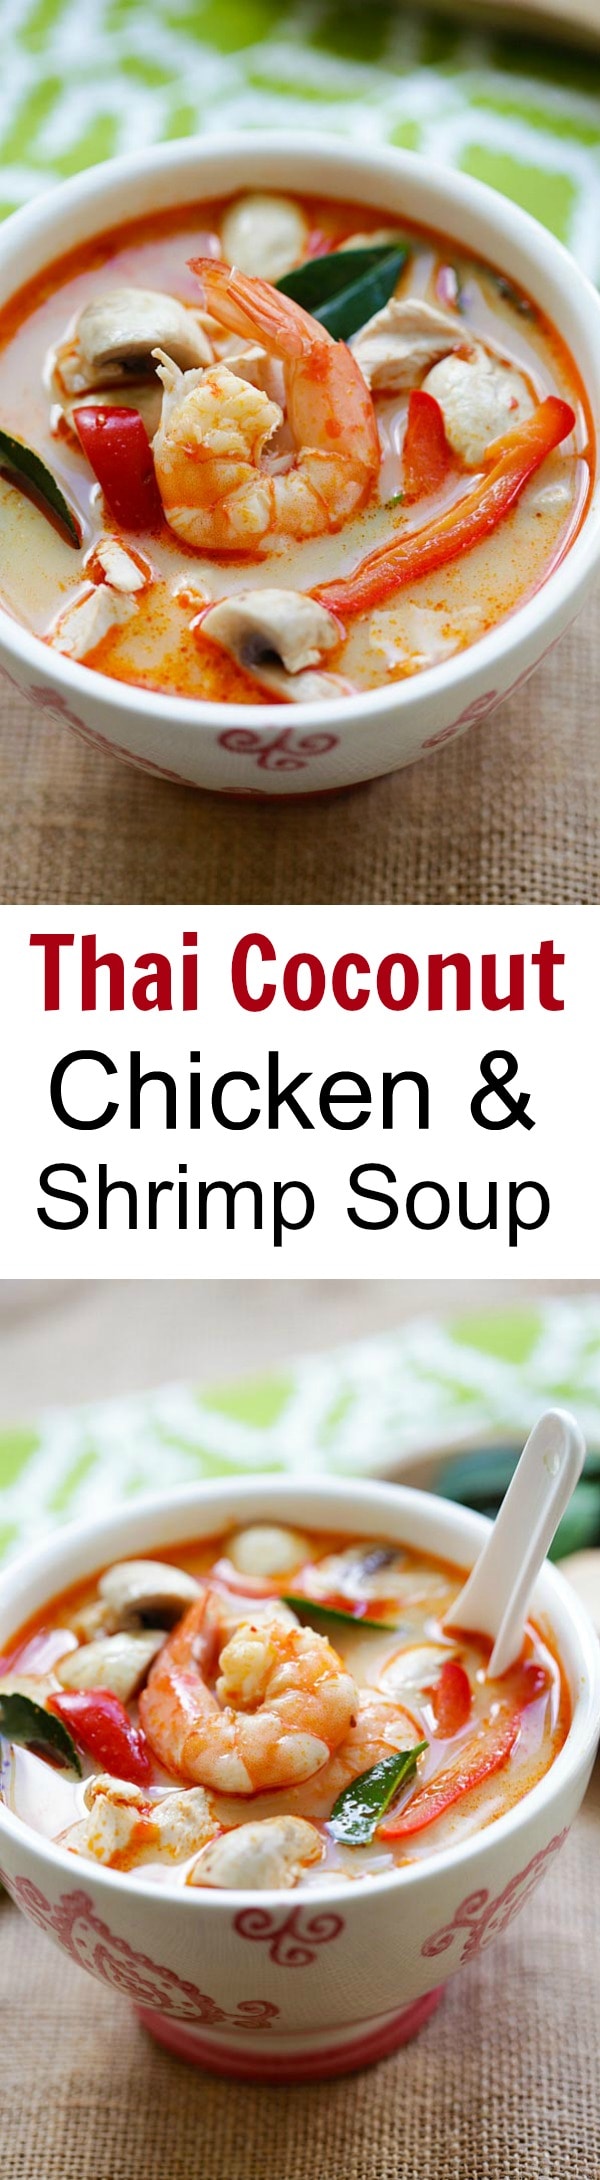 Thai Coconut Chicken and Shrimp Soup – the best soup you'll ever make in your kitchen. This soup is to-die-for, better than Thai takeout! | rasamalaysia.com